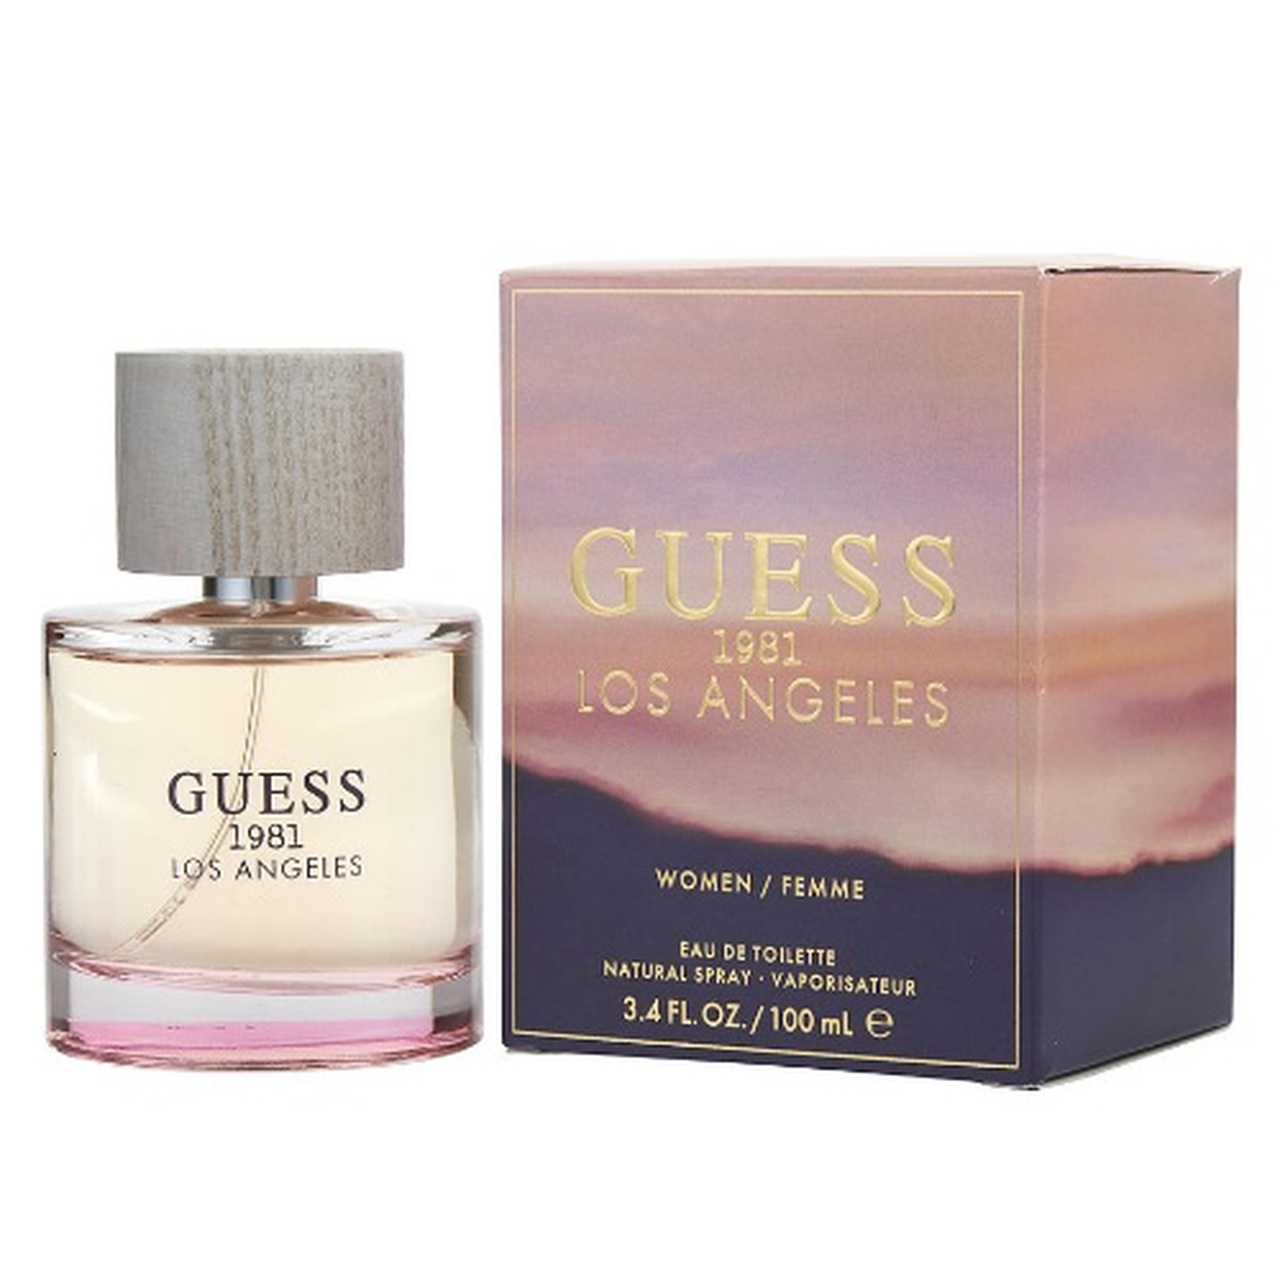 Guess Los Angeles By Guess - The Perfume Club